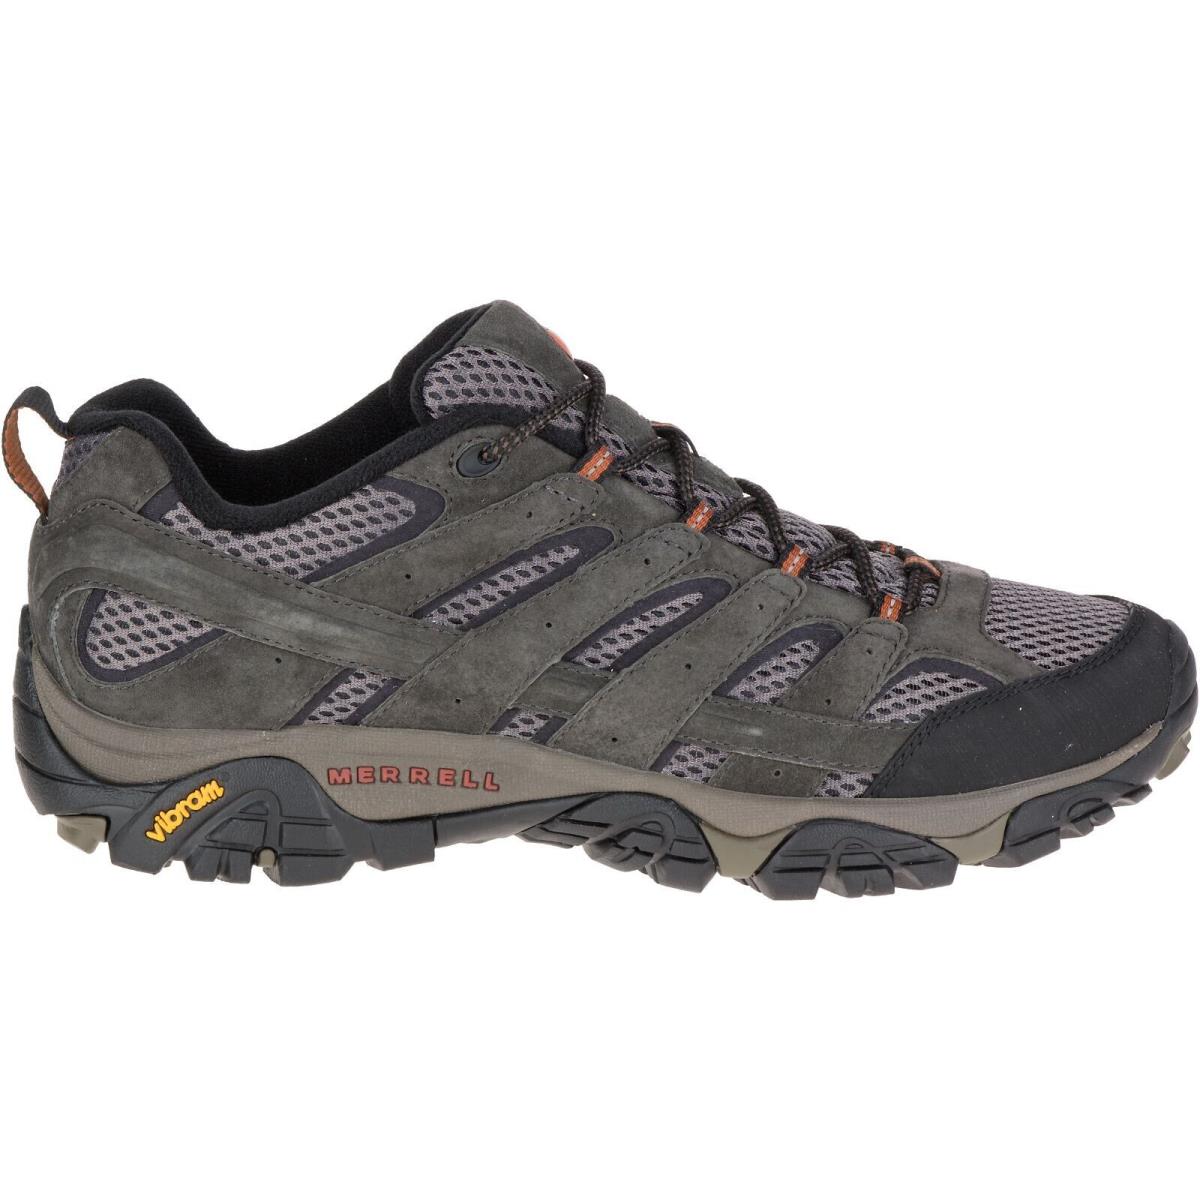 Merrell Moab 2 Vent Men`s Leather Hiking Low Top Shoes Size 10.5 W - Beluga